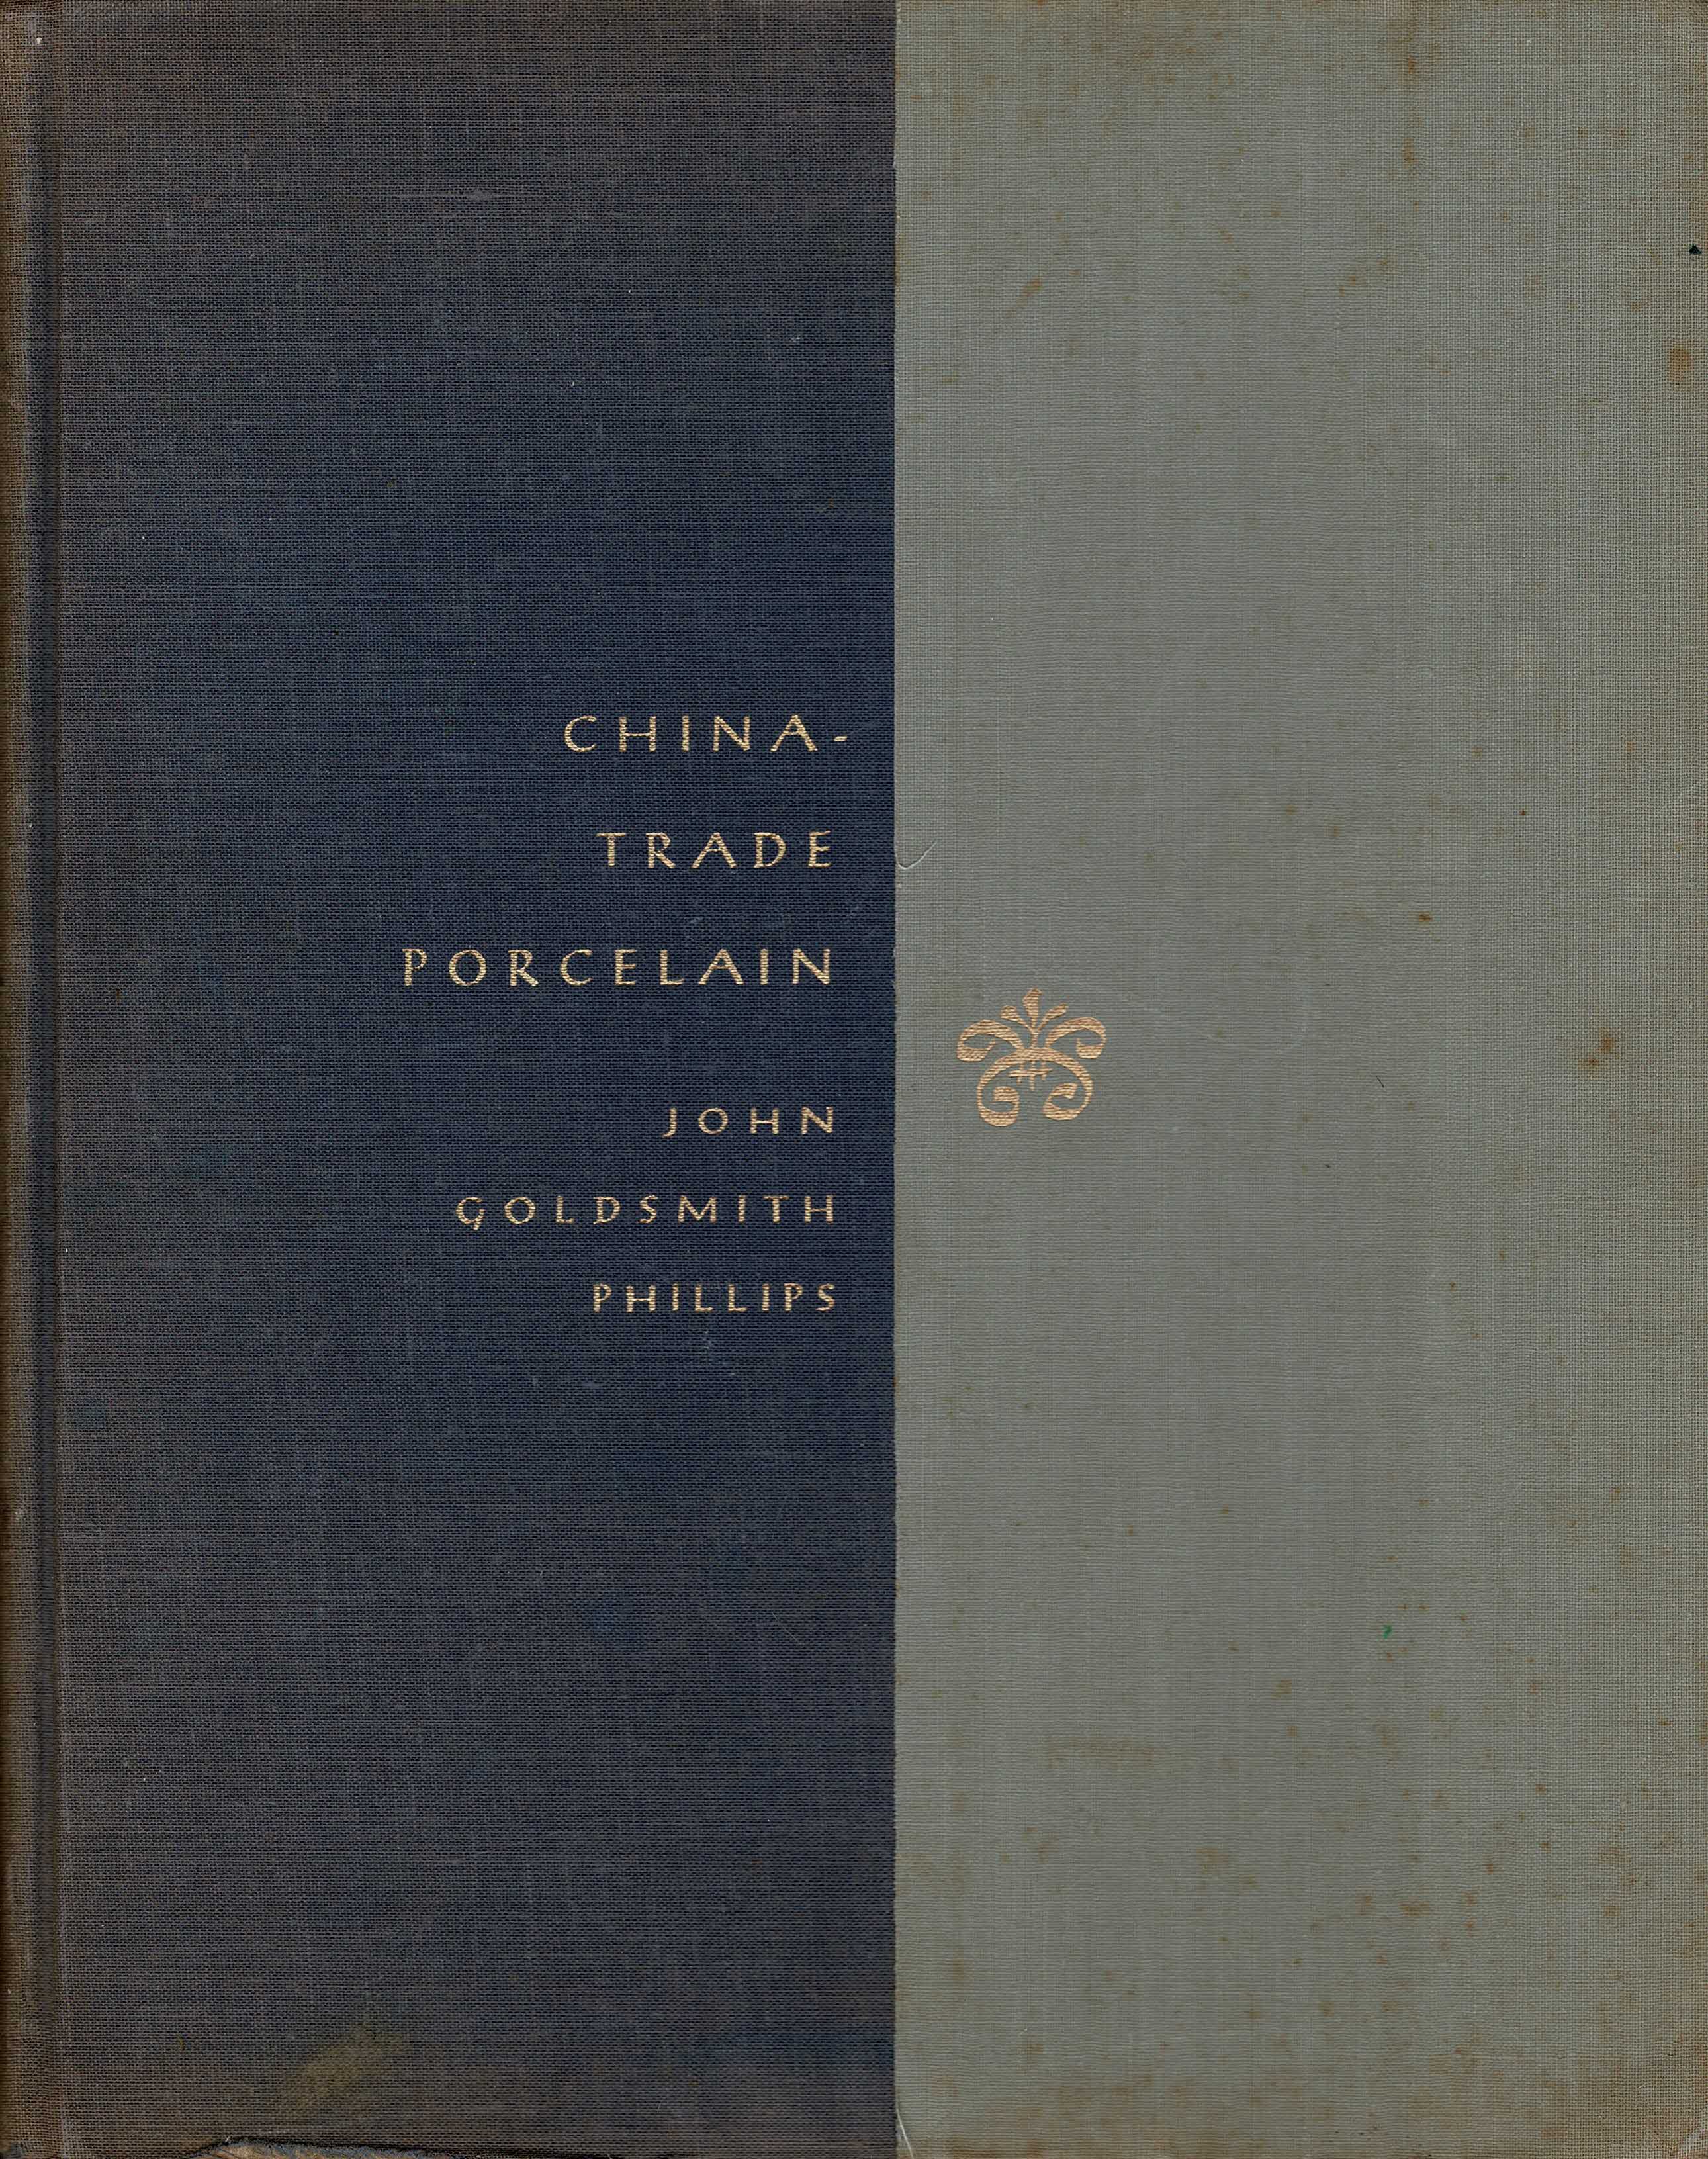 Phillips, John Goldsmith - China-Trade Porcelain. An Account of its Historical Background, Manufacture and Decoration and a Study of the Helena Woolworth McCann Collection